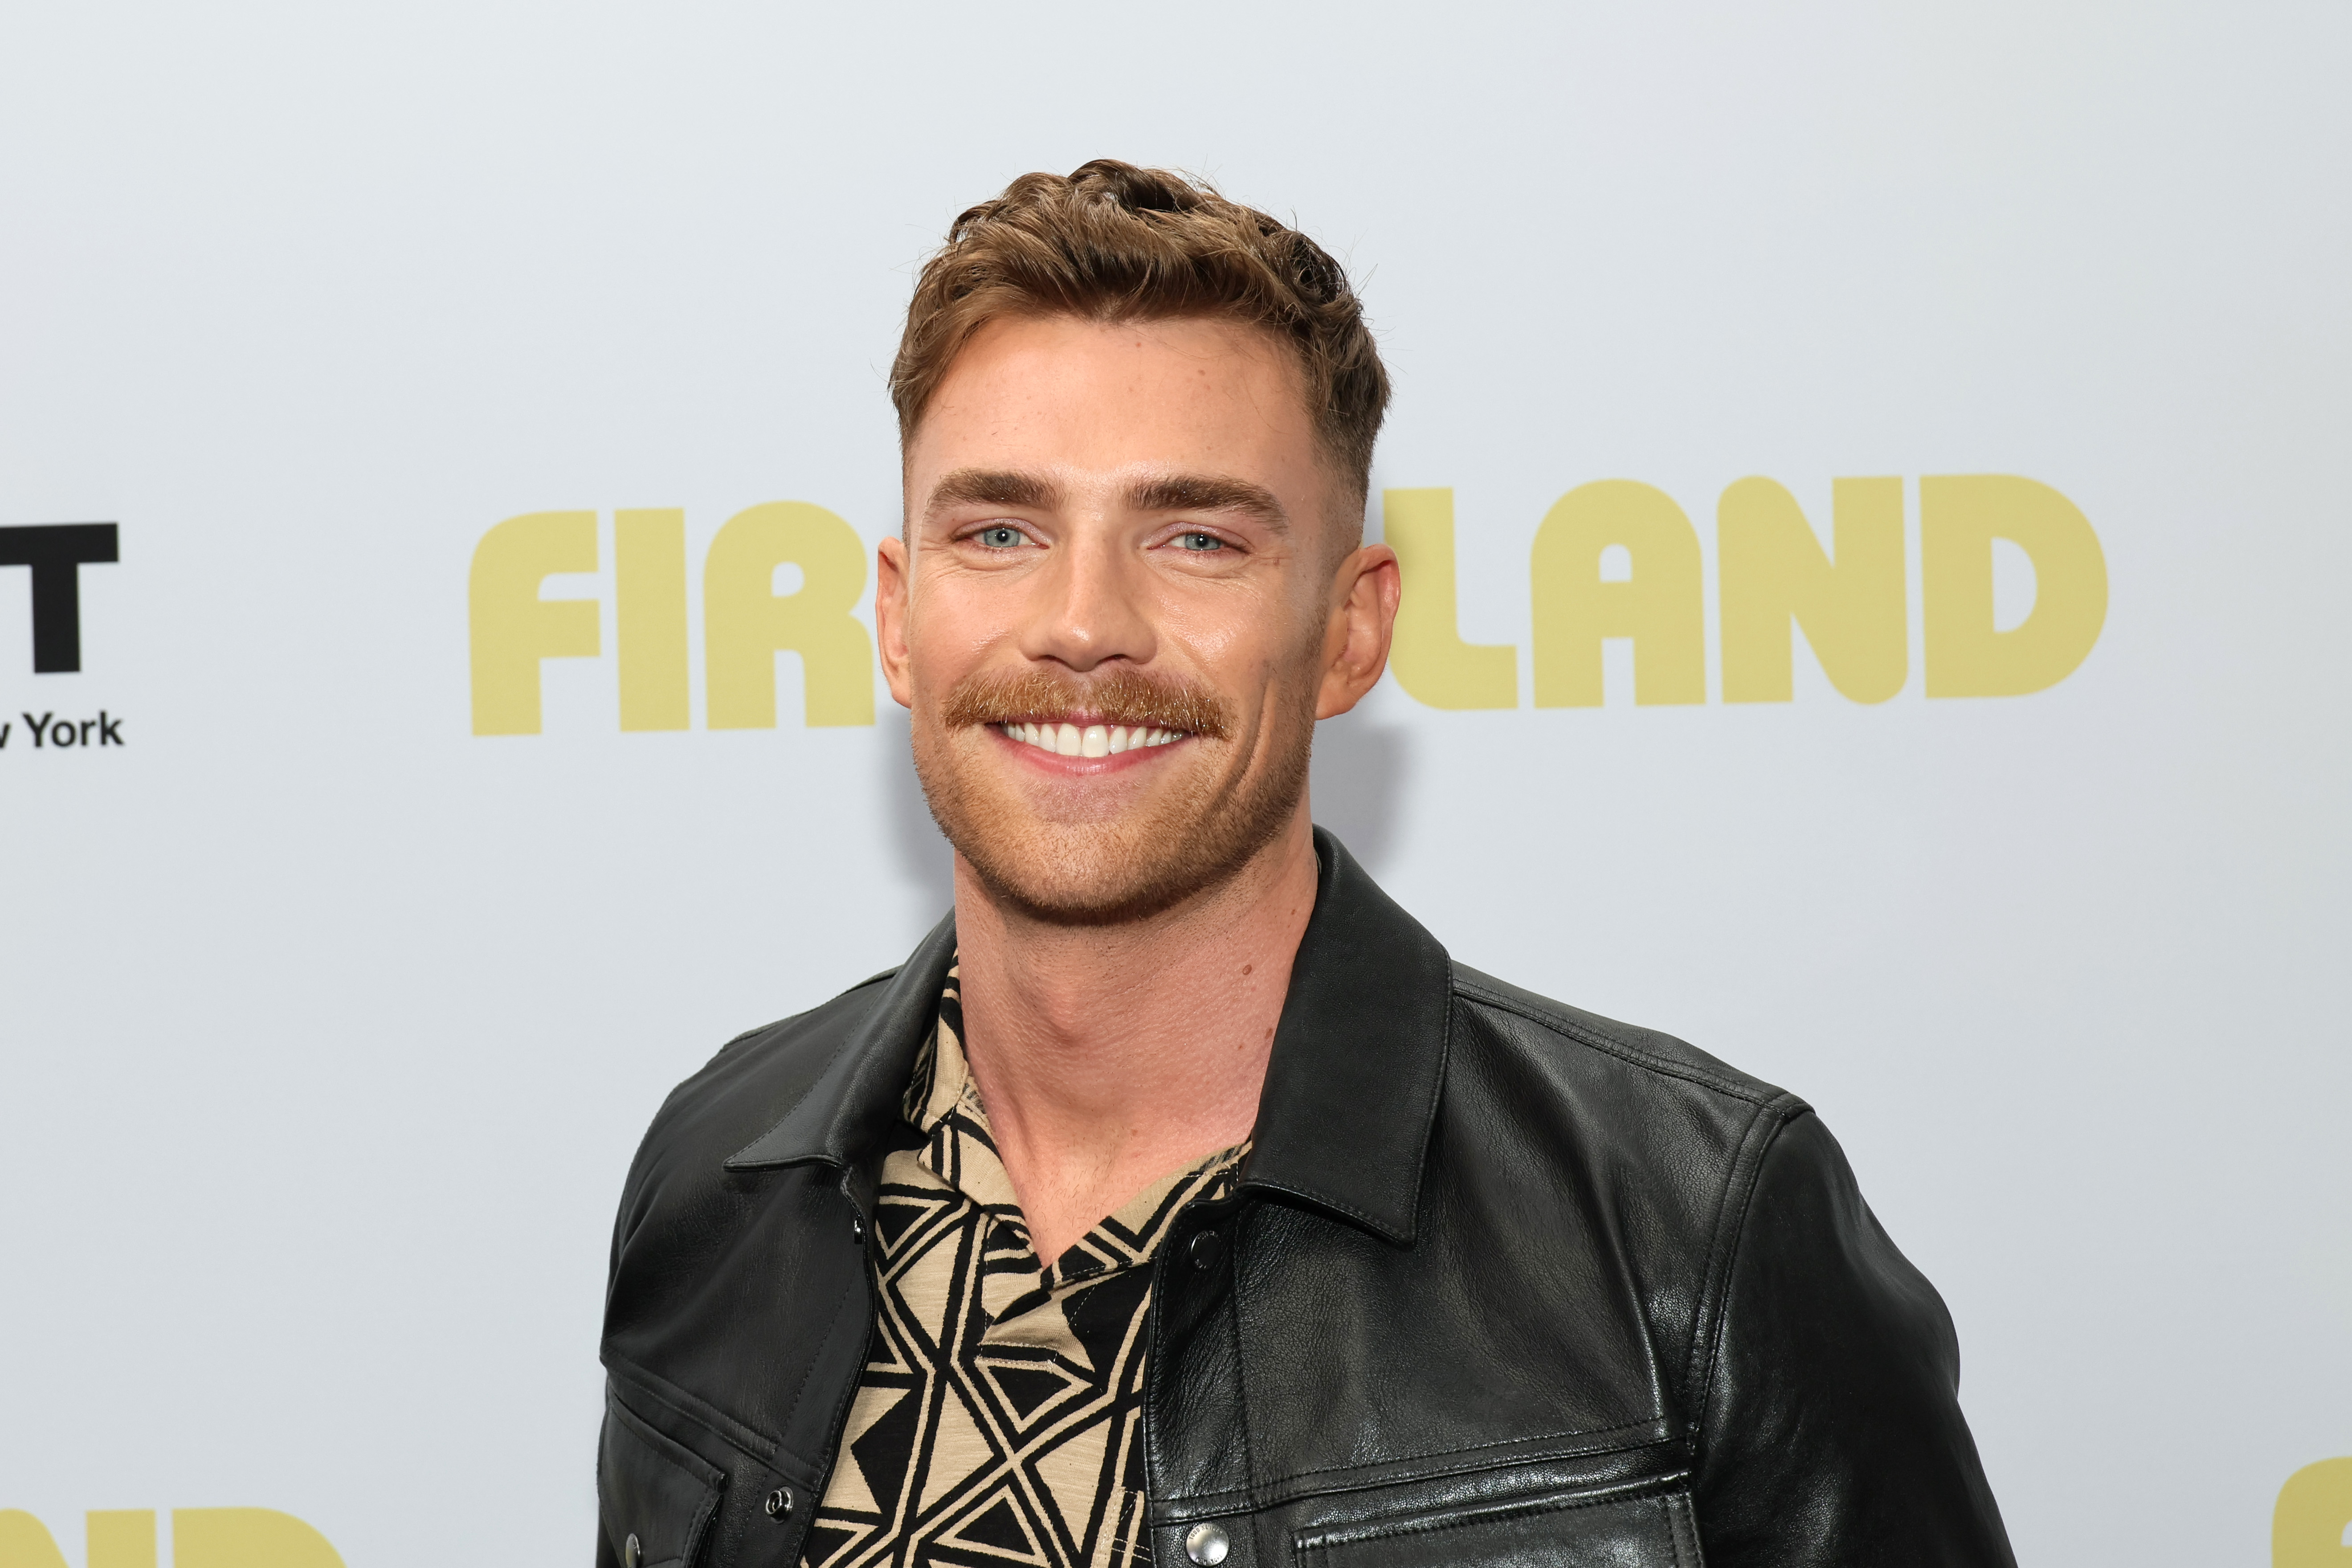 Zane Phillips attends the premiere of "Fire Island" during the opening night of NewFest Pride at SVA Theater, on June 2, 2022, in New York City. | Source: Getty Images